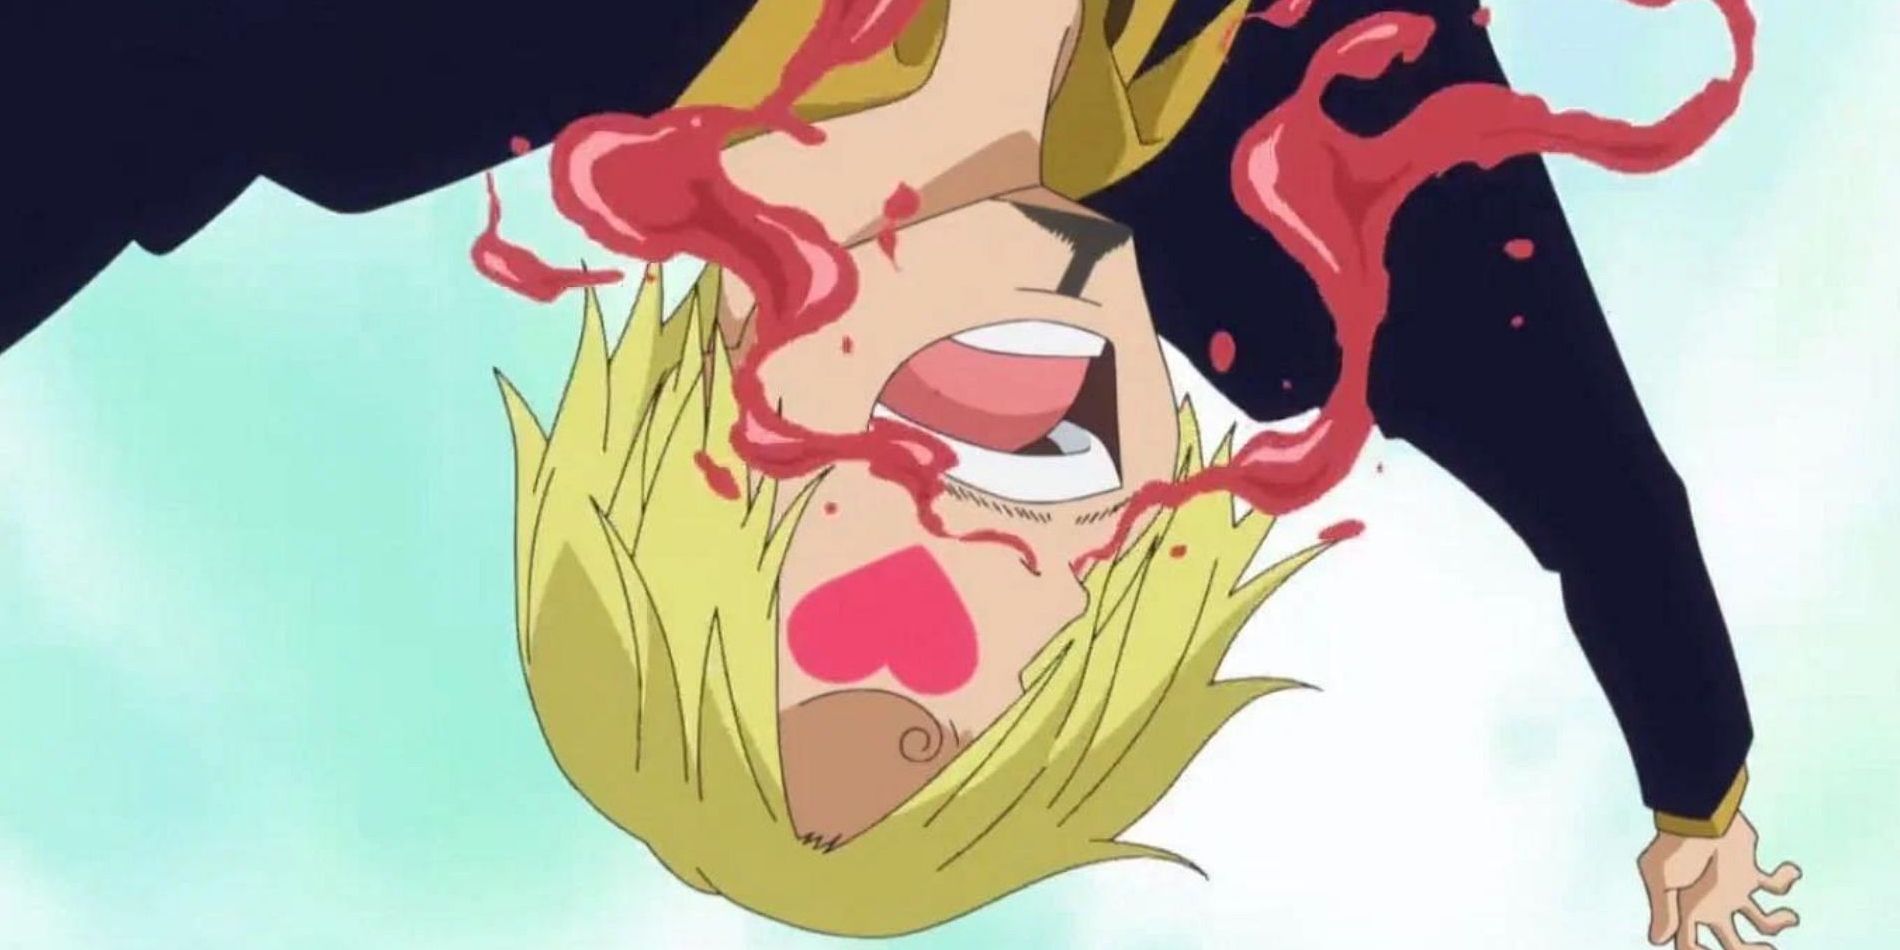 Sanji bleeding from his nose